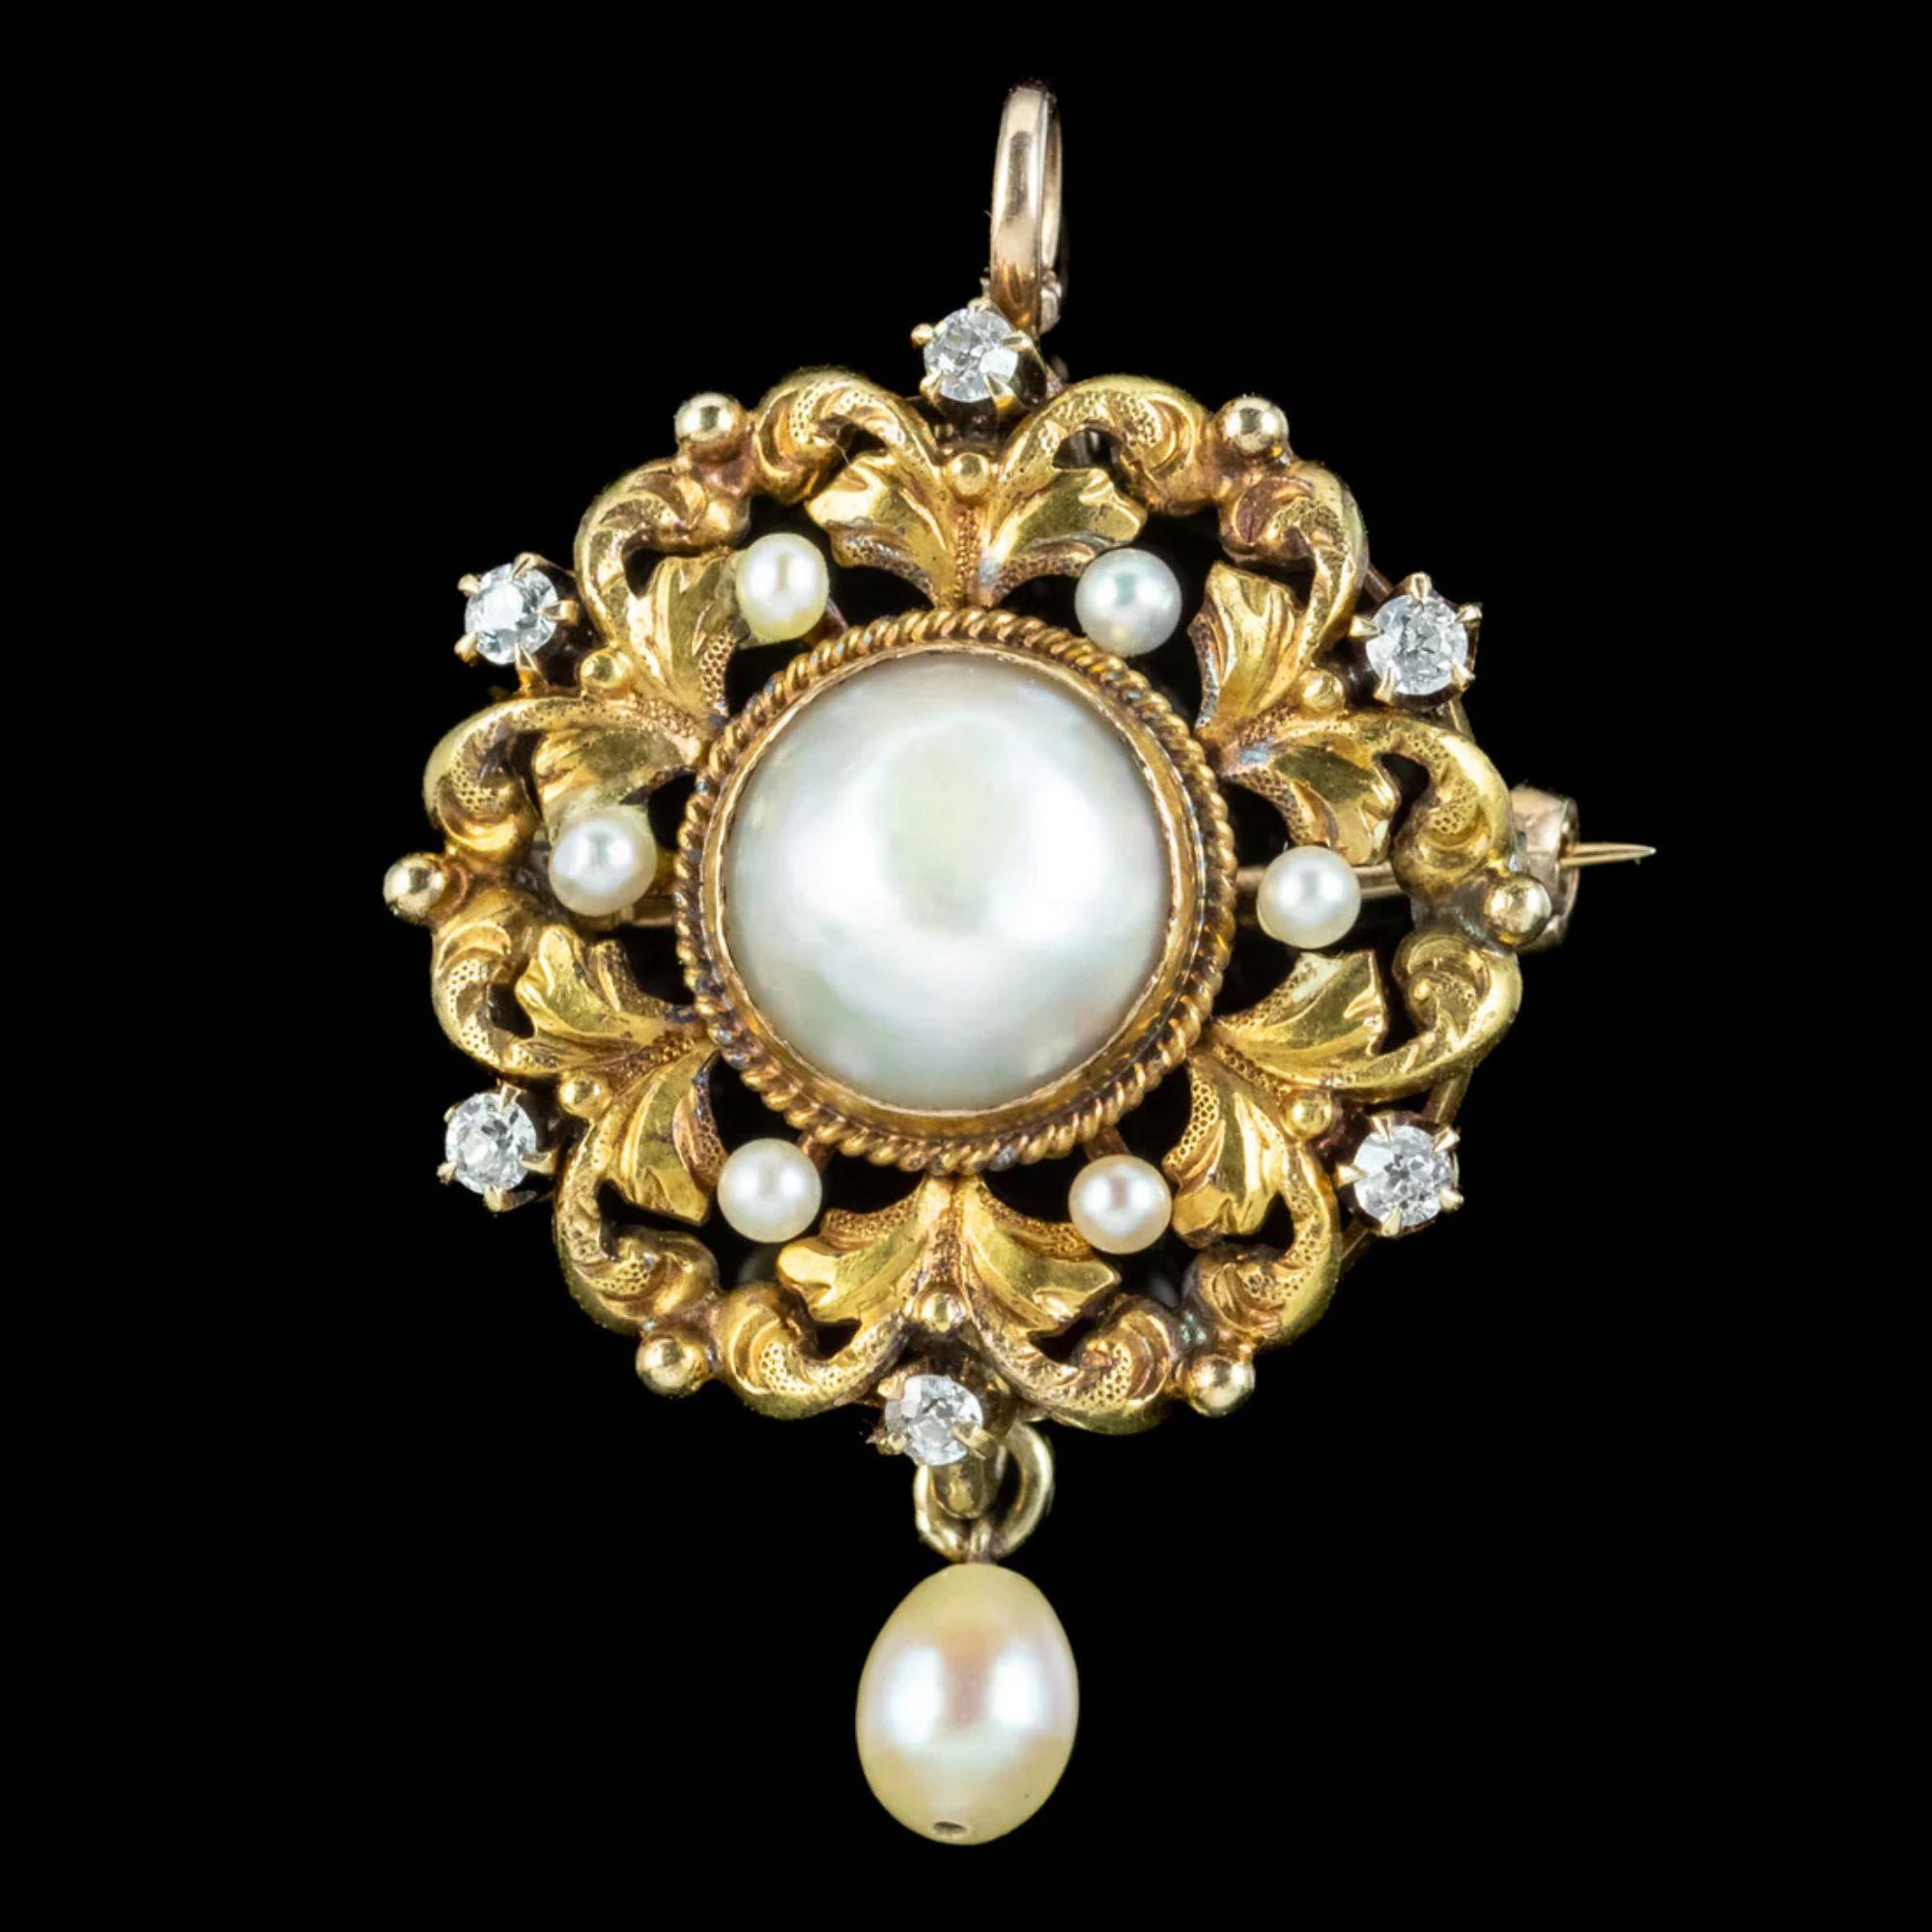 A beautiful little antique Victorian pendant/ brooch depicting a leafy, 18ct gold wreath, surrounding a large natural pearl in the centre. It has a lovely lustre and is complemented by a halo of twinkling old mine cut diamonds and smaller pearls,